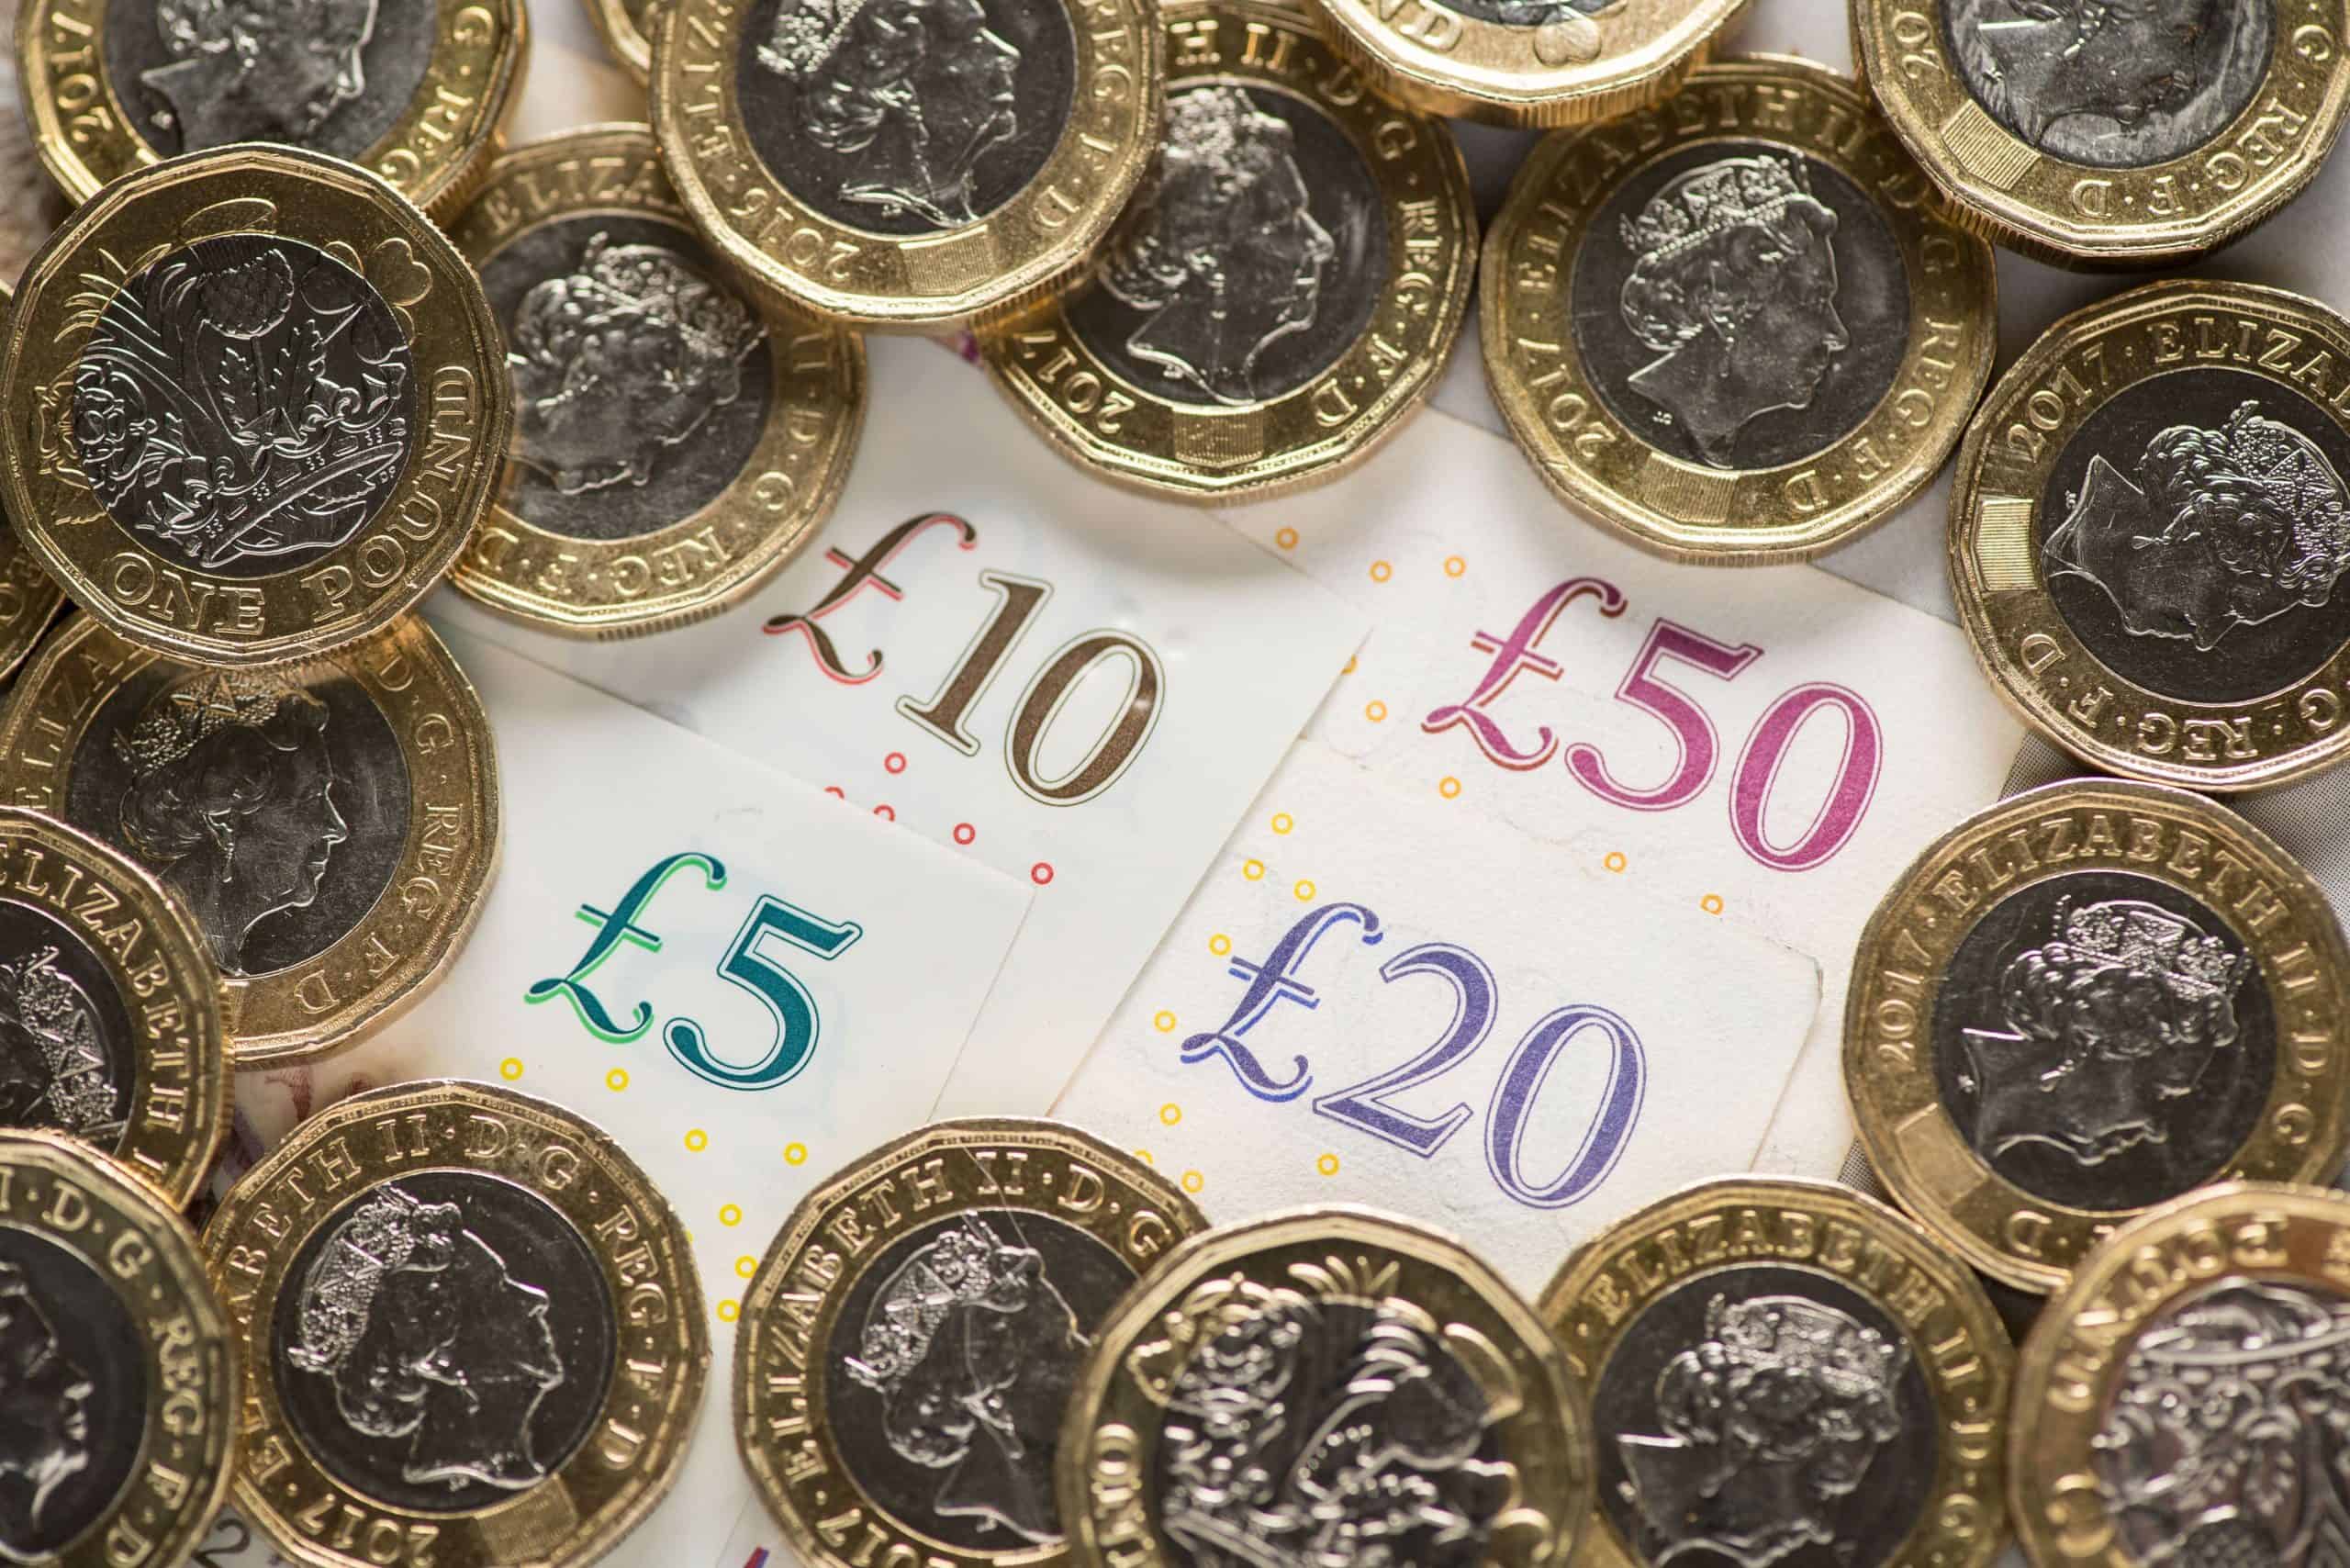 British pound risks crisis ‘usually seen in emerging markets’, analysts warn